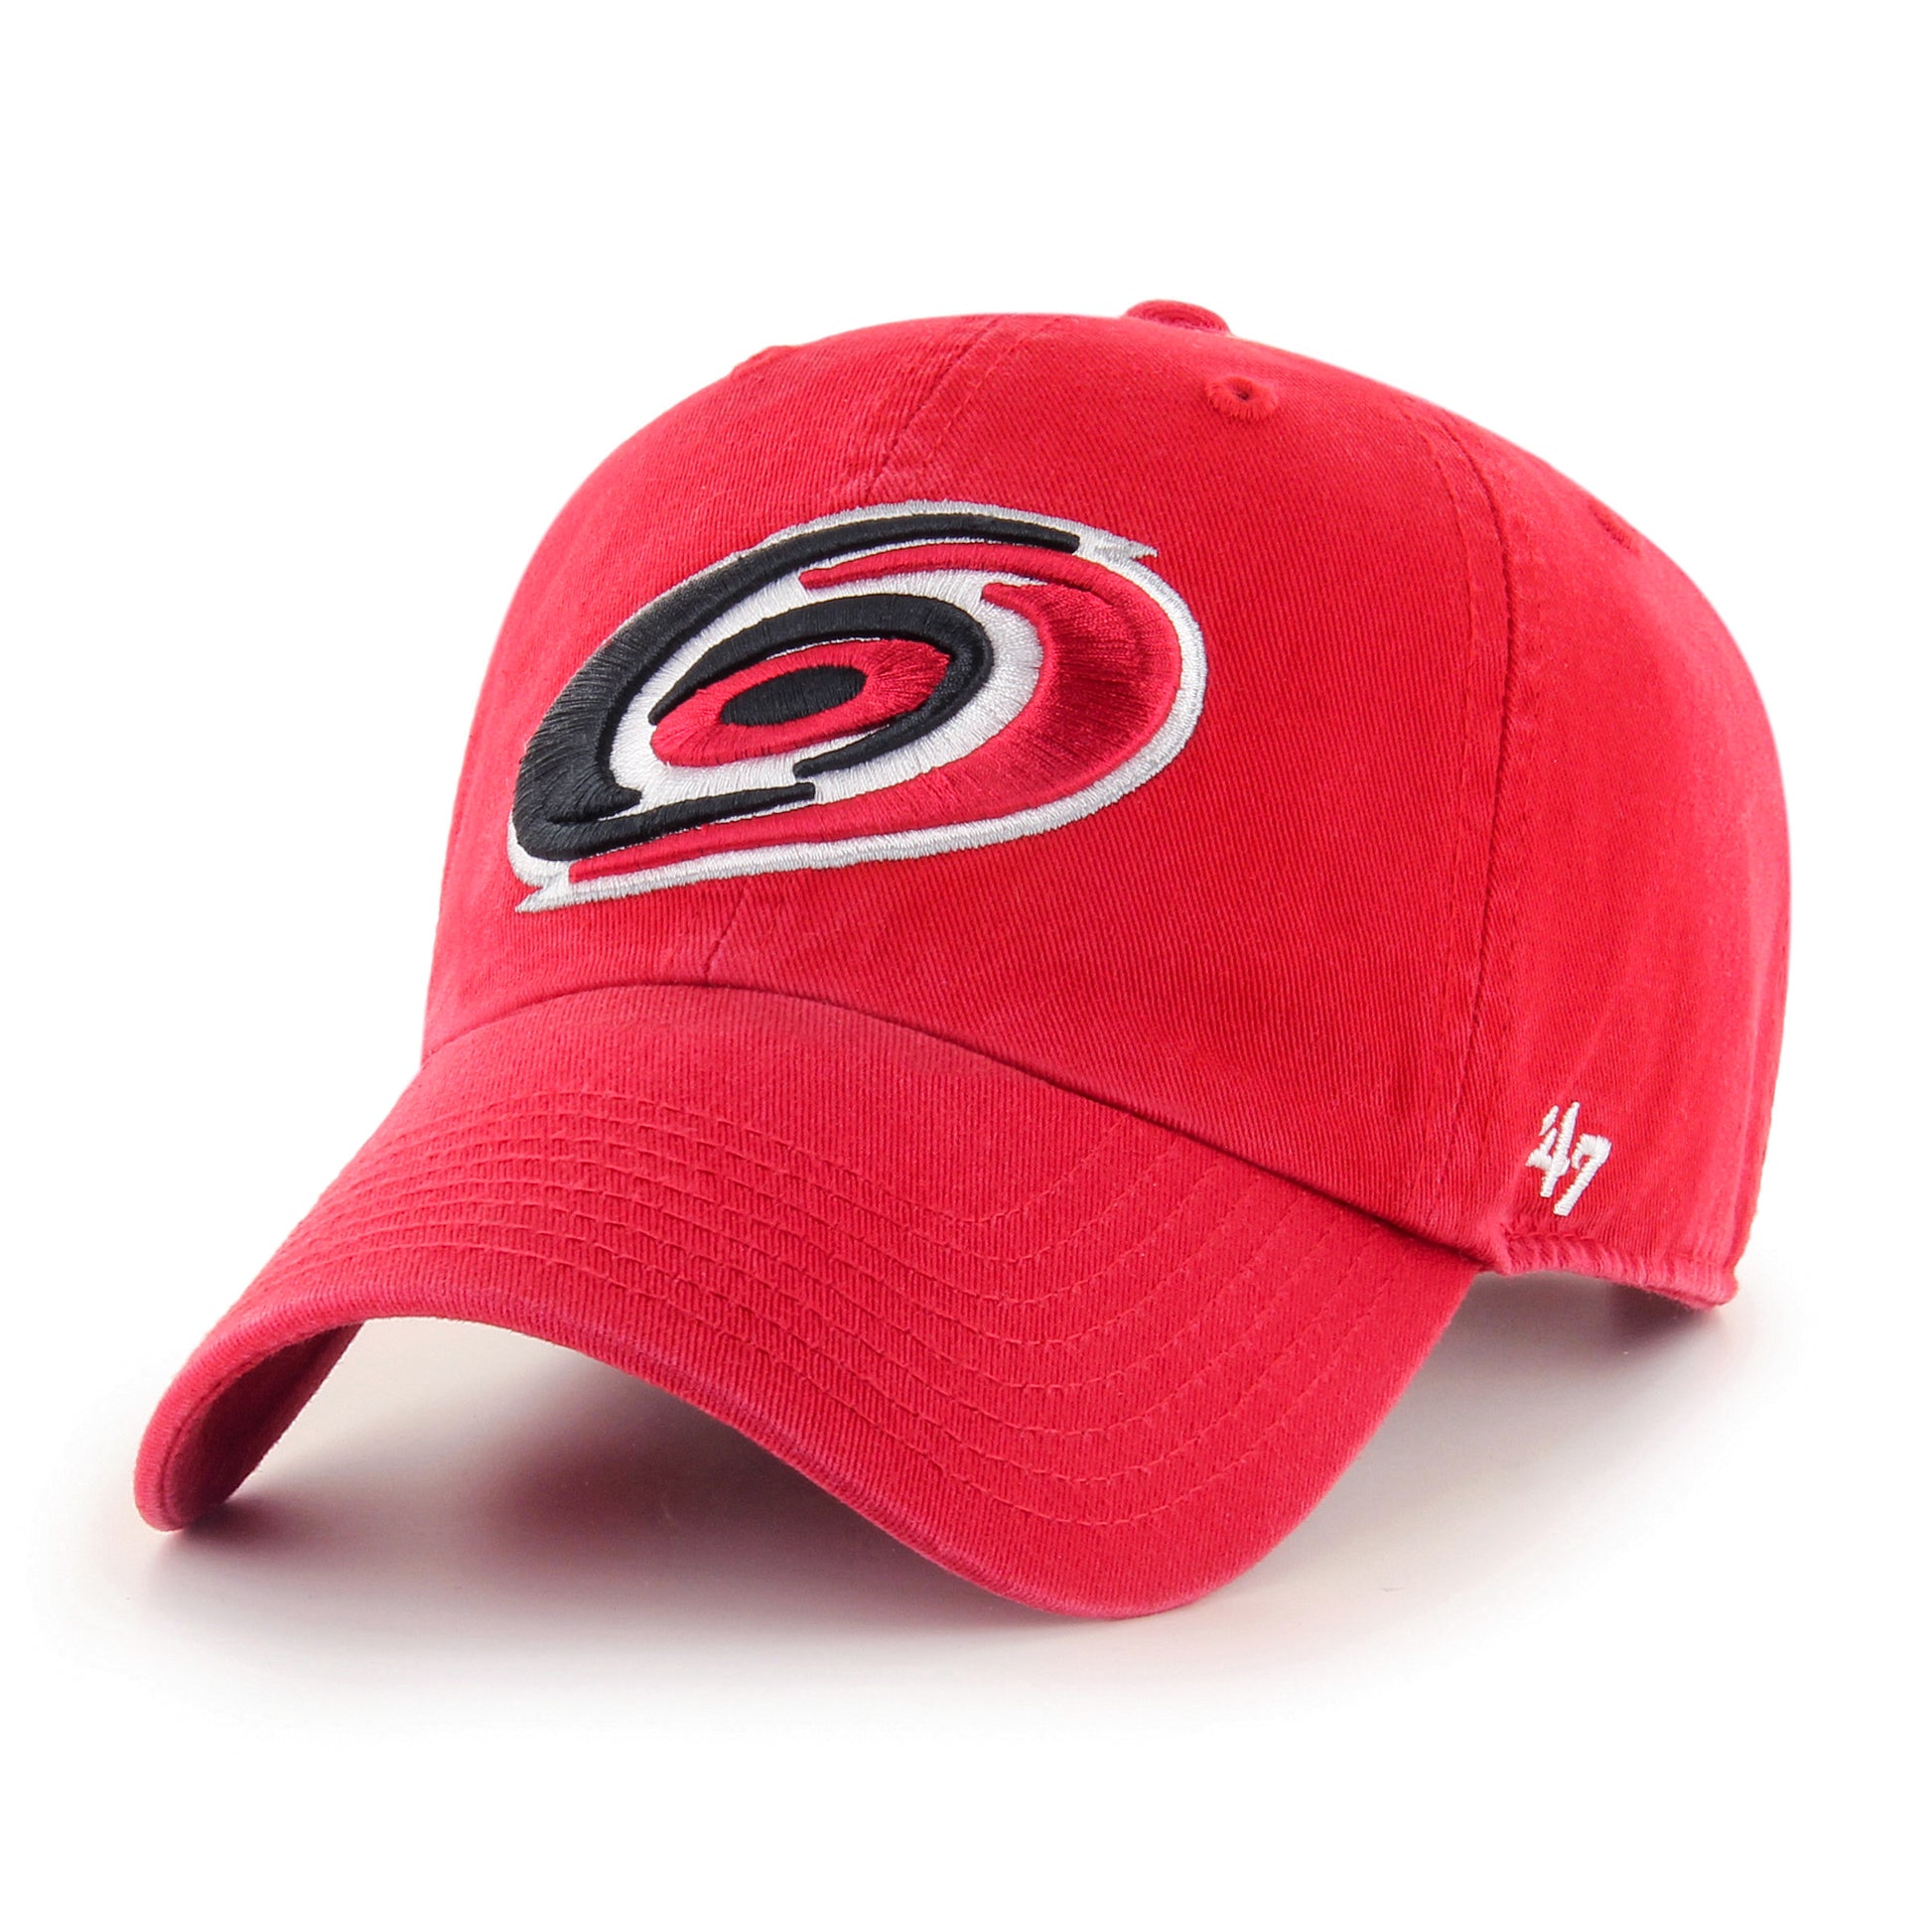 Front view red hat primary hurricanes logo on front 47 brand on side